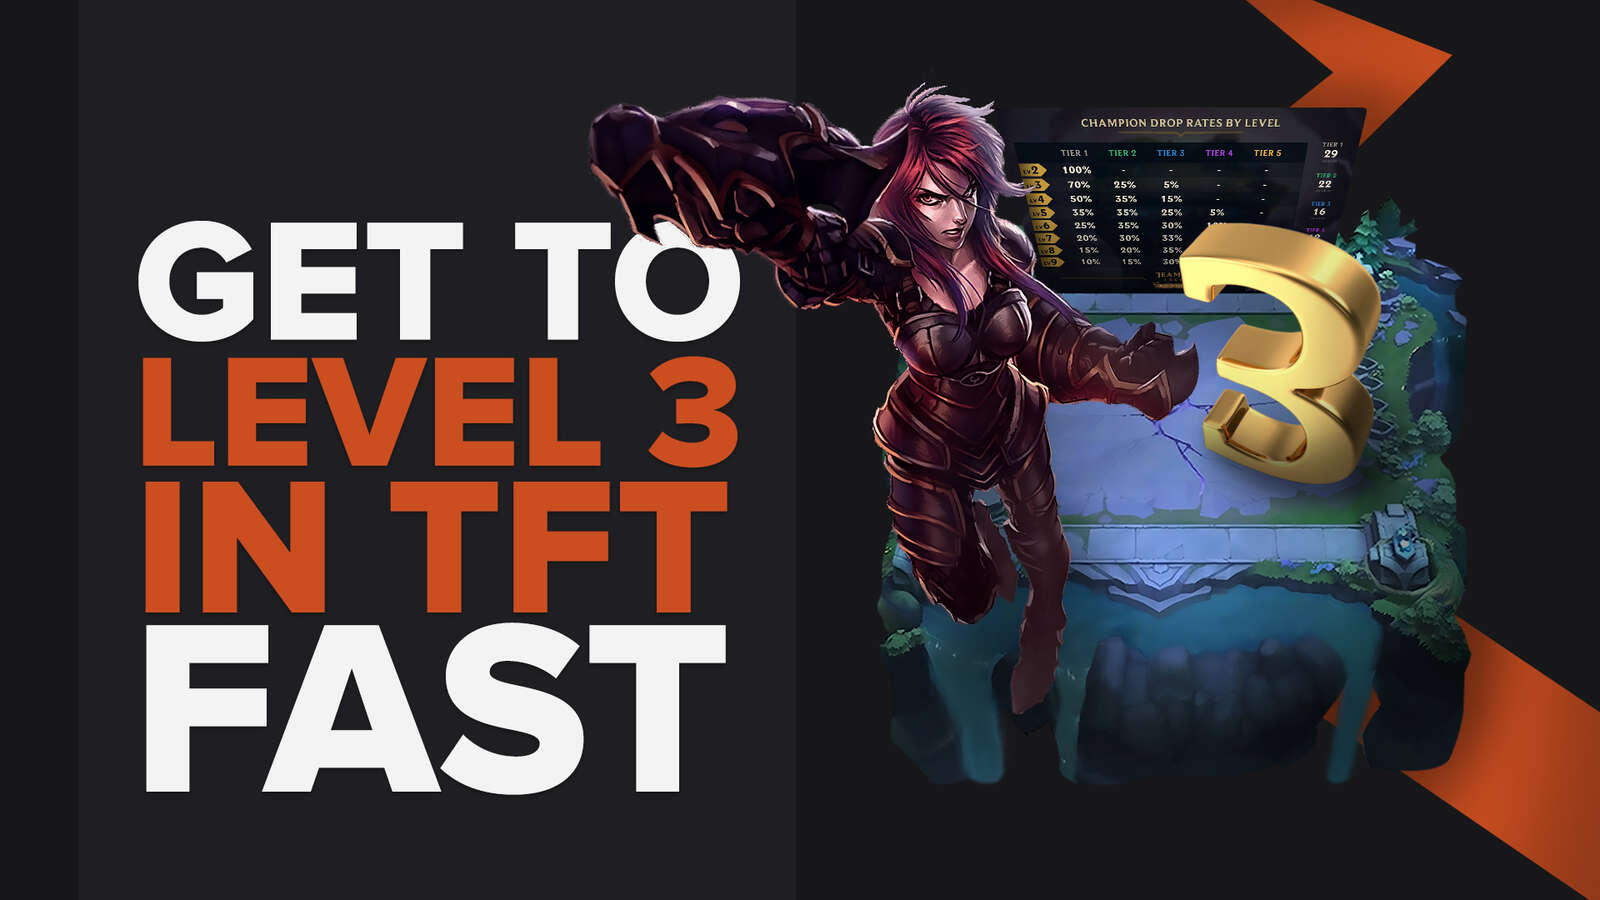 All Methods to Get to Level 3 in TFT in no Time